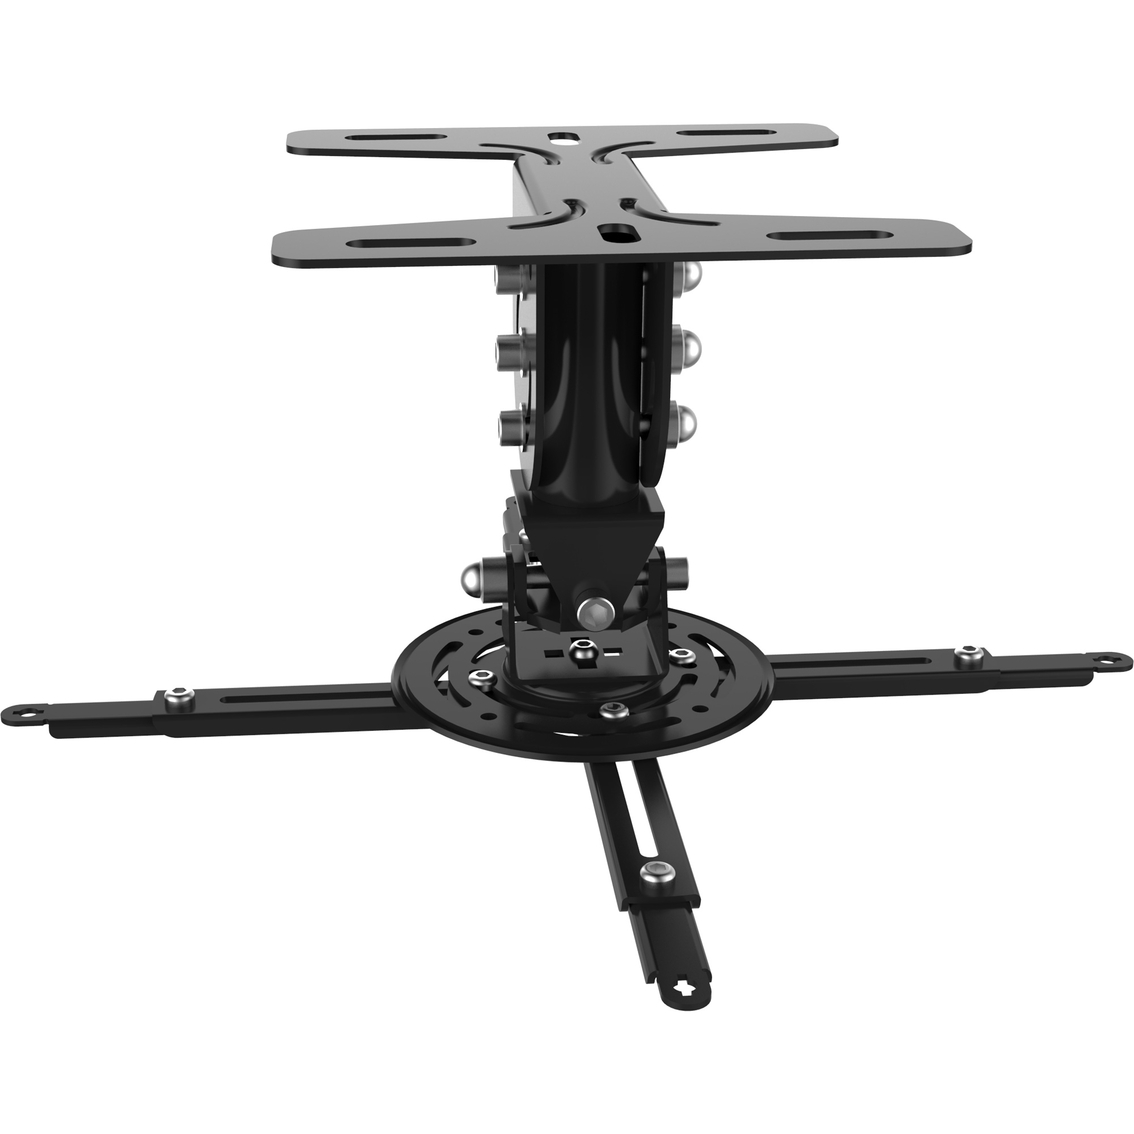 ProMounts Universal Projector Ceiling Mount Bracket up to 44lbs - Image 2 of 6